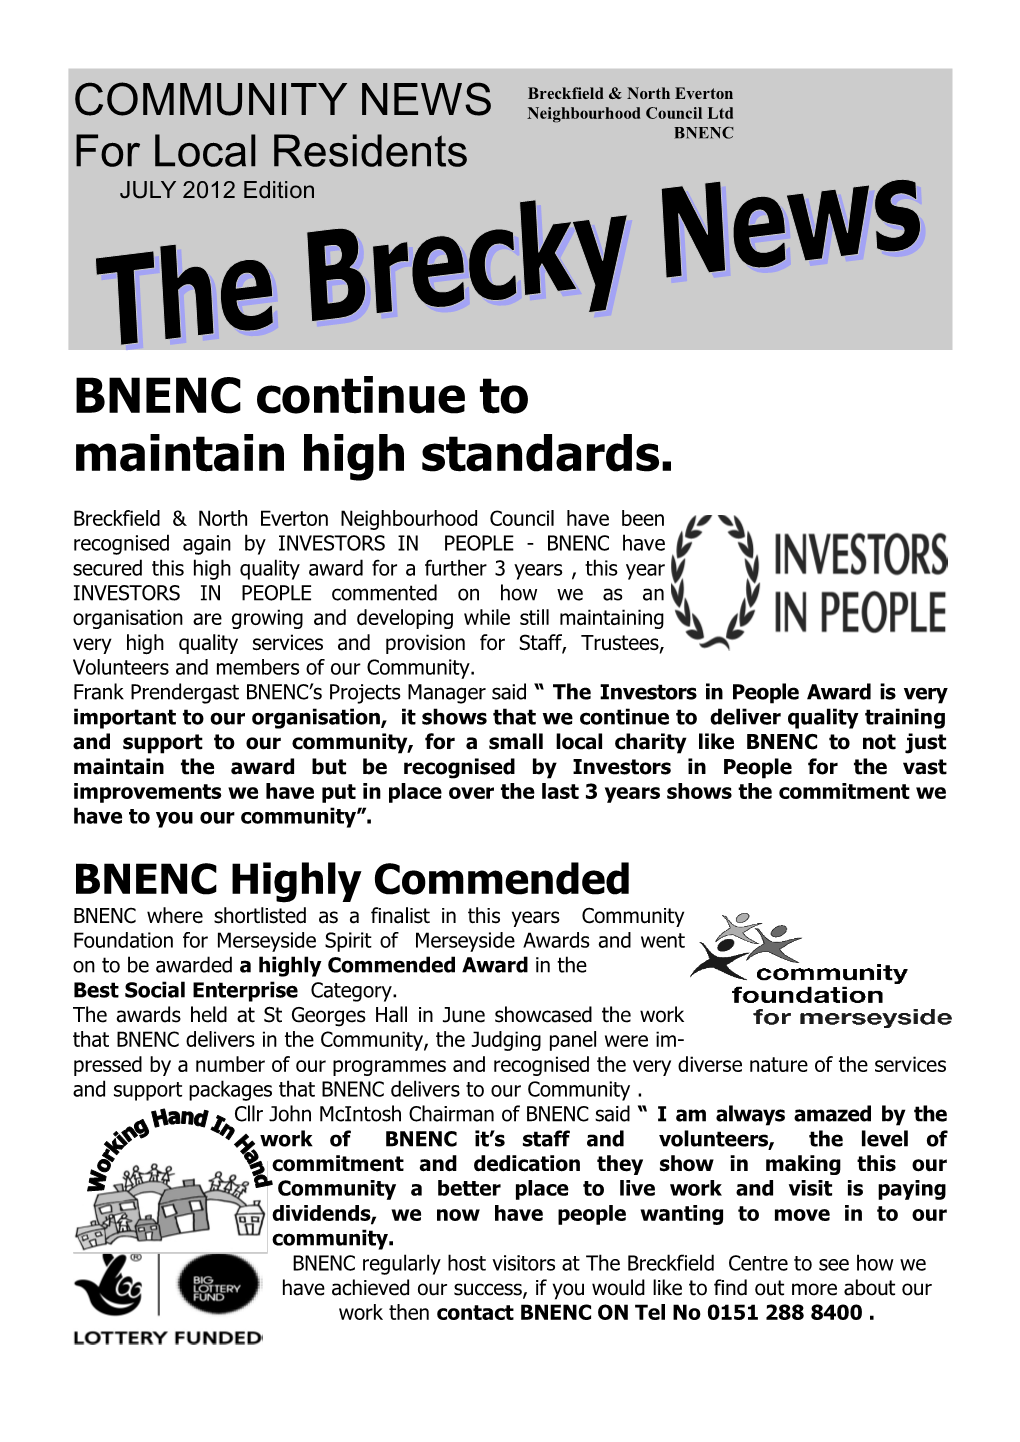 BNENC Continue to Maintain High Standards